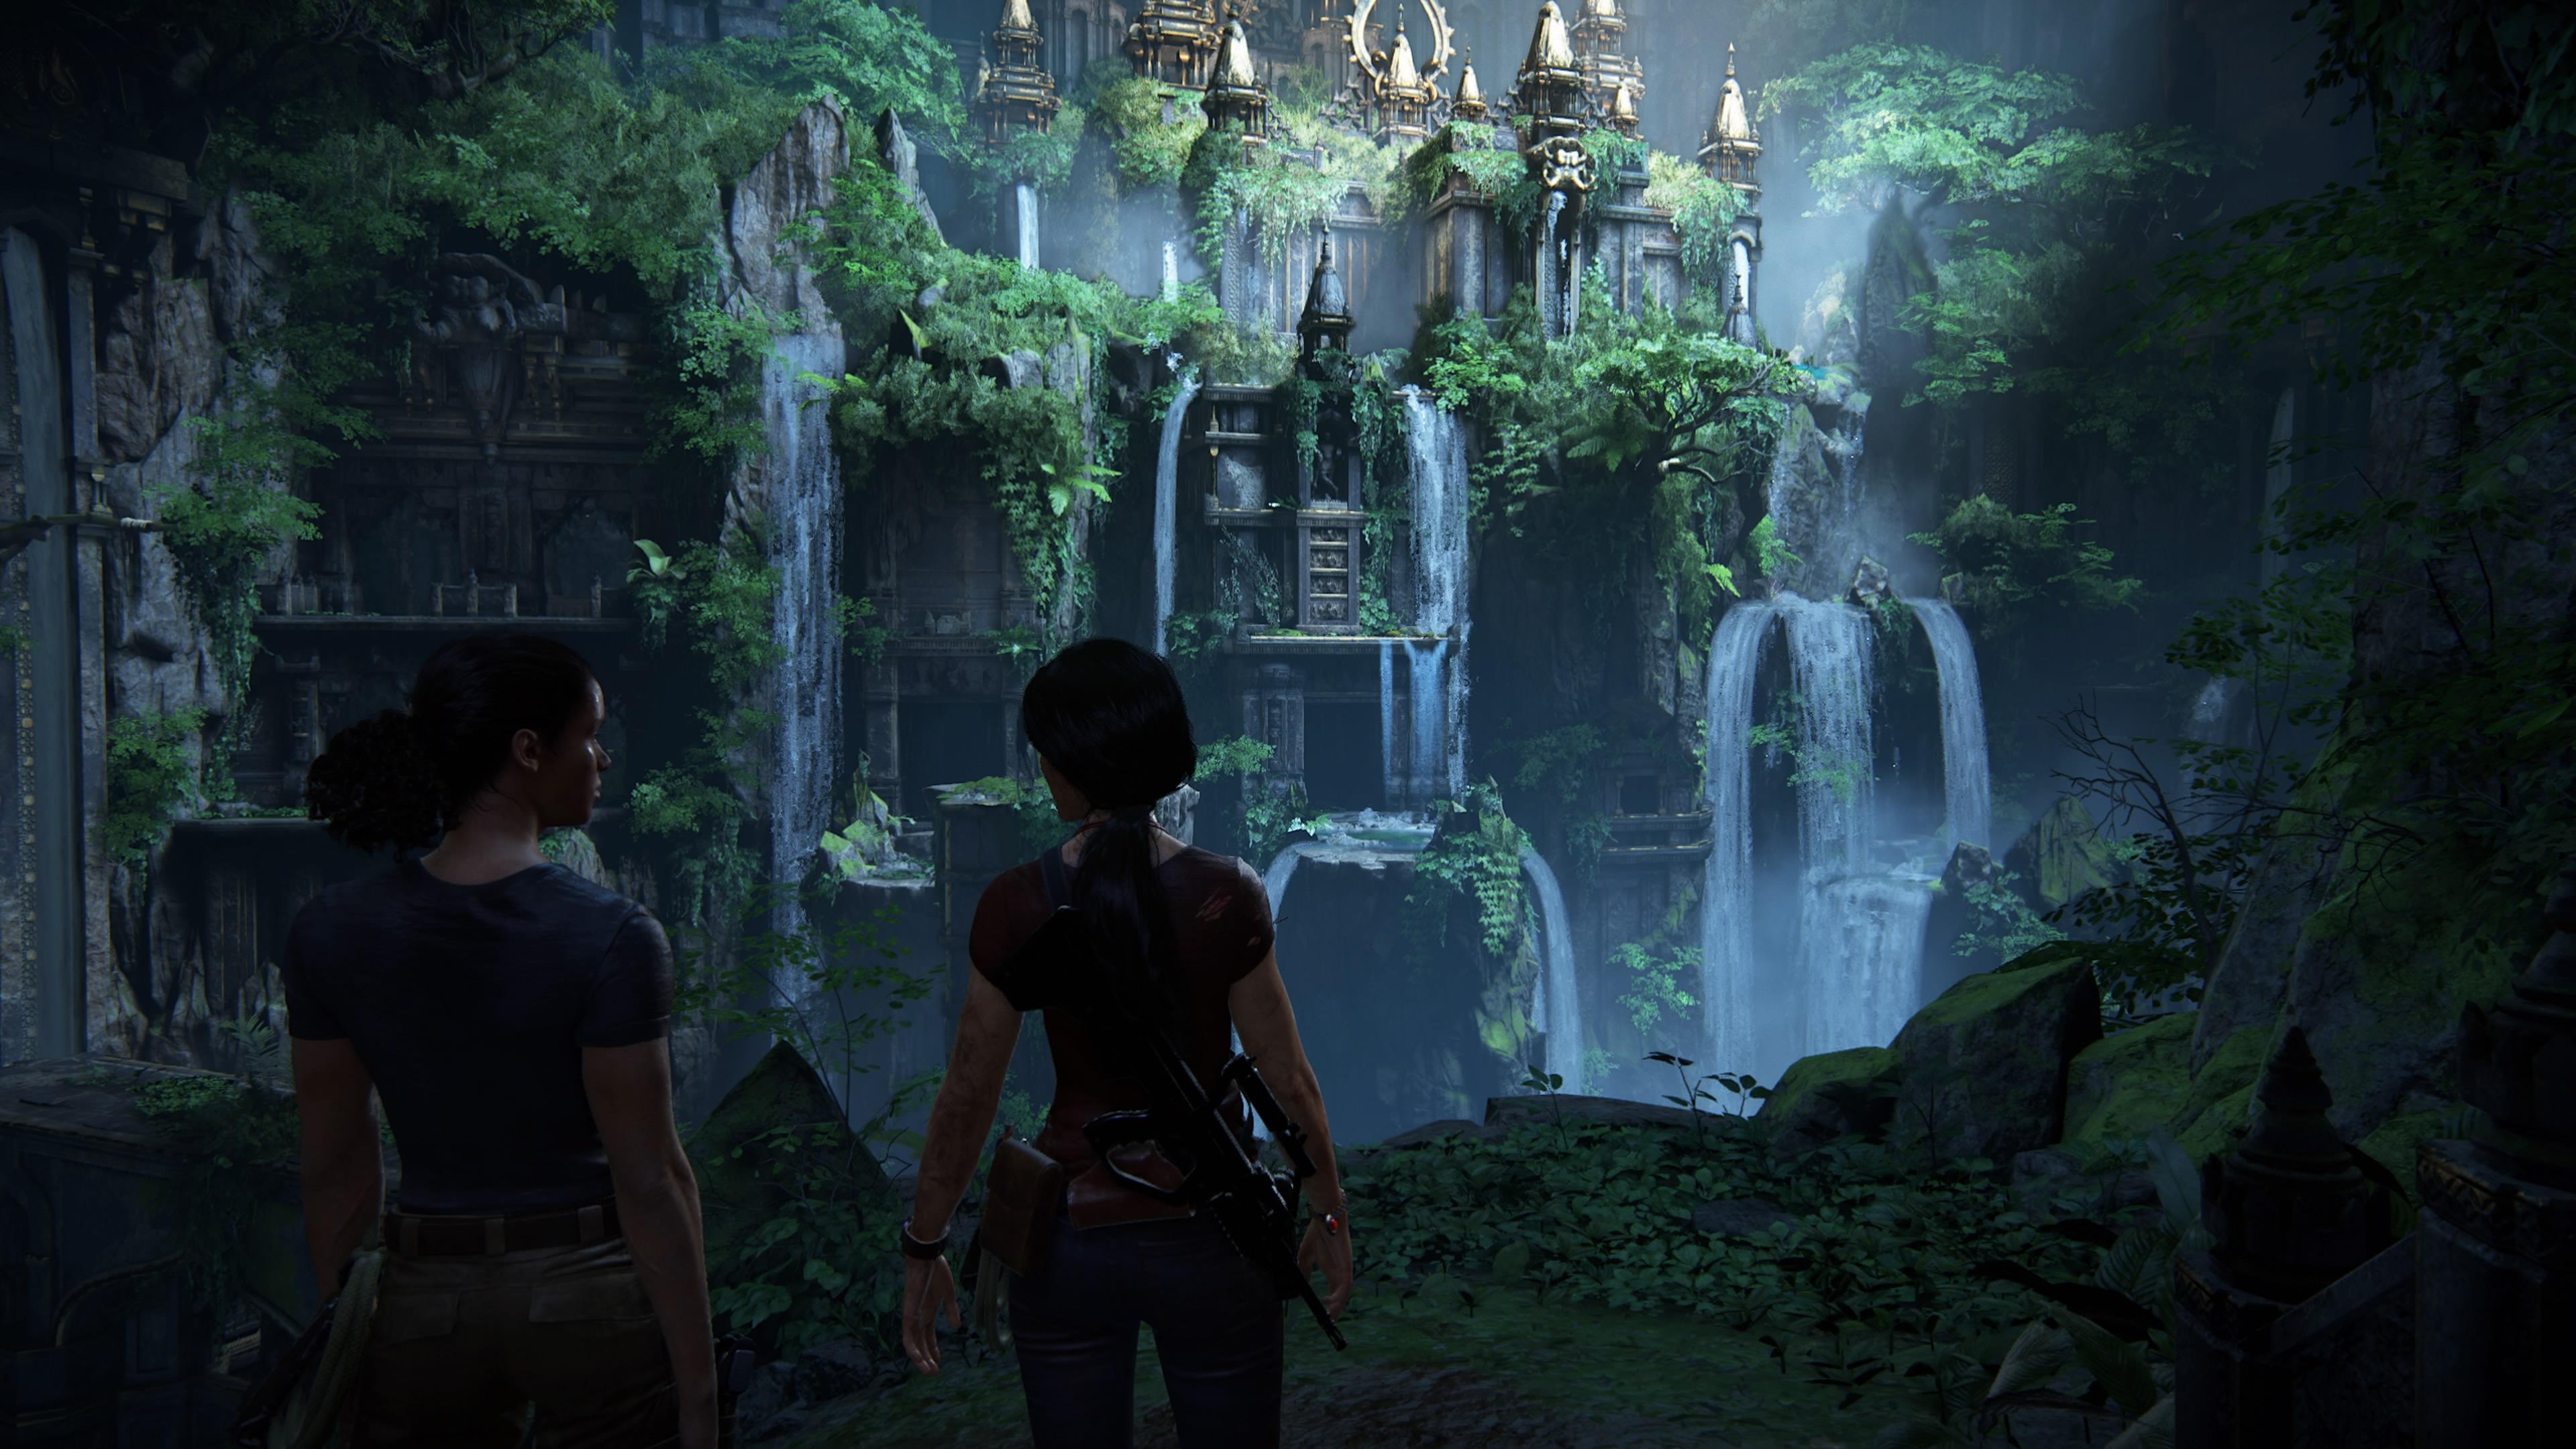 Uncharted наследие прохождение. Анчартед 4 наследие. Uncharted: the Lost Legacy. Квесты Uncharted: the Lost Legacy. Uncharted Lost Legacy screenshots.